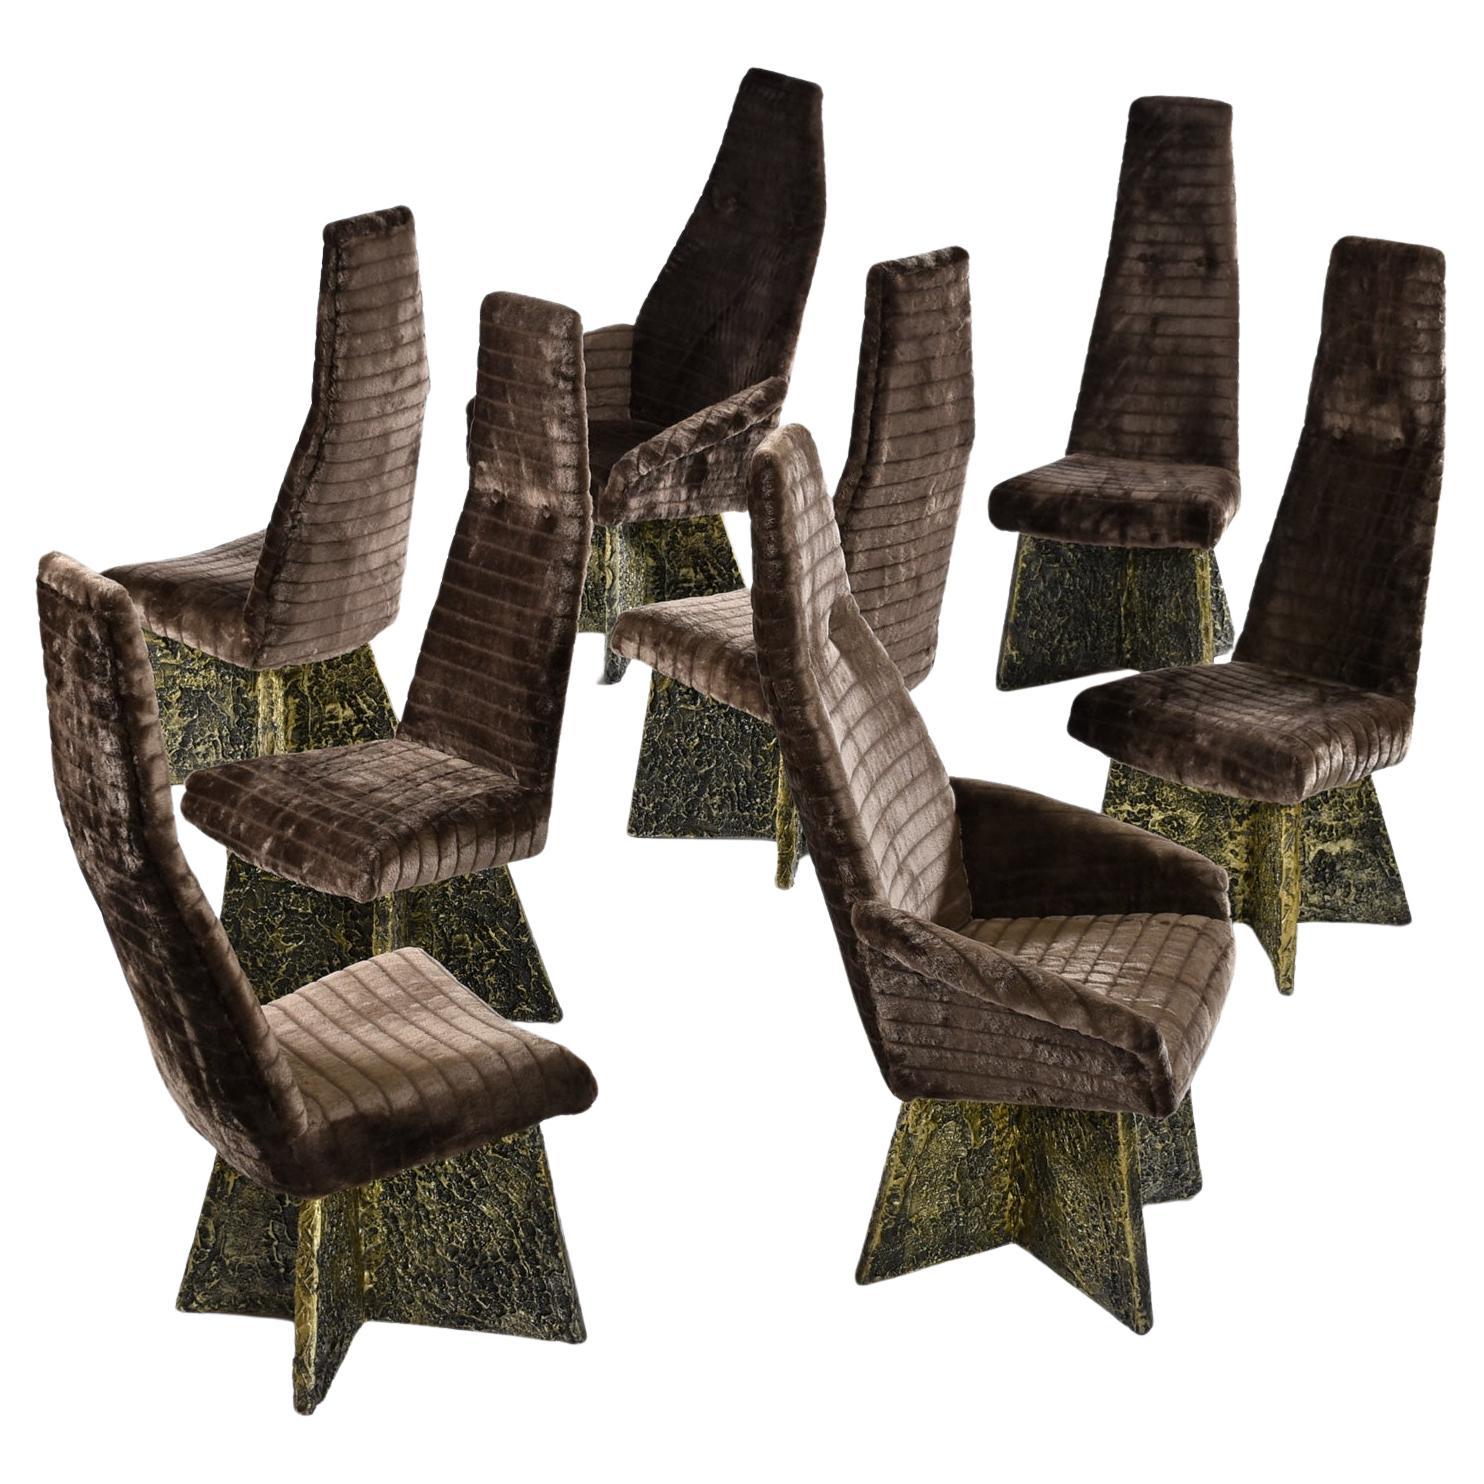 (8) Adrian Pearsall Kodiak Faux Fur Brutalist Style Dining Room Chairs In Excellent Condition For Sale In Chattanooga, TN